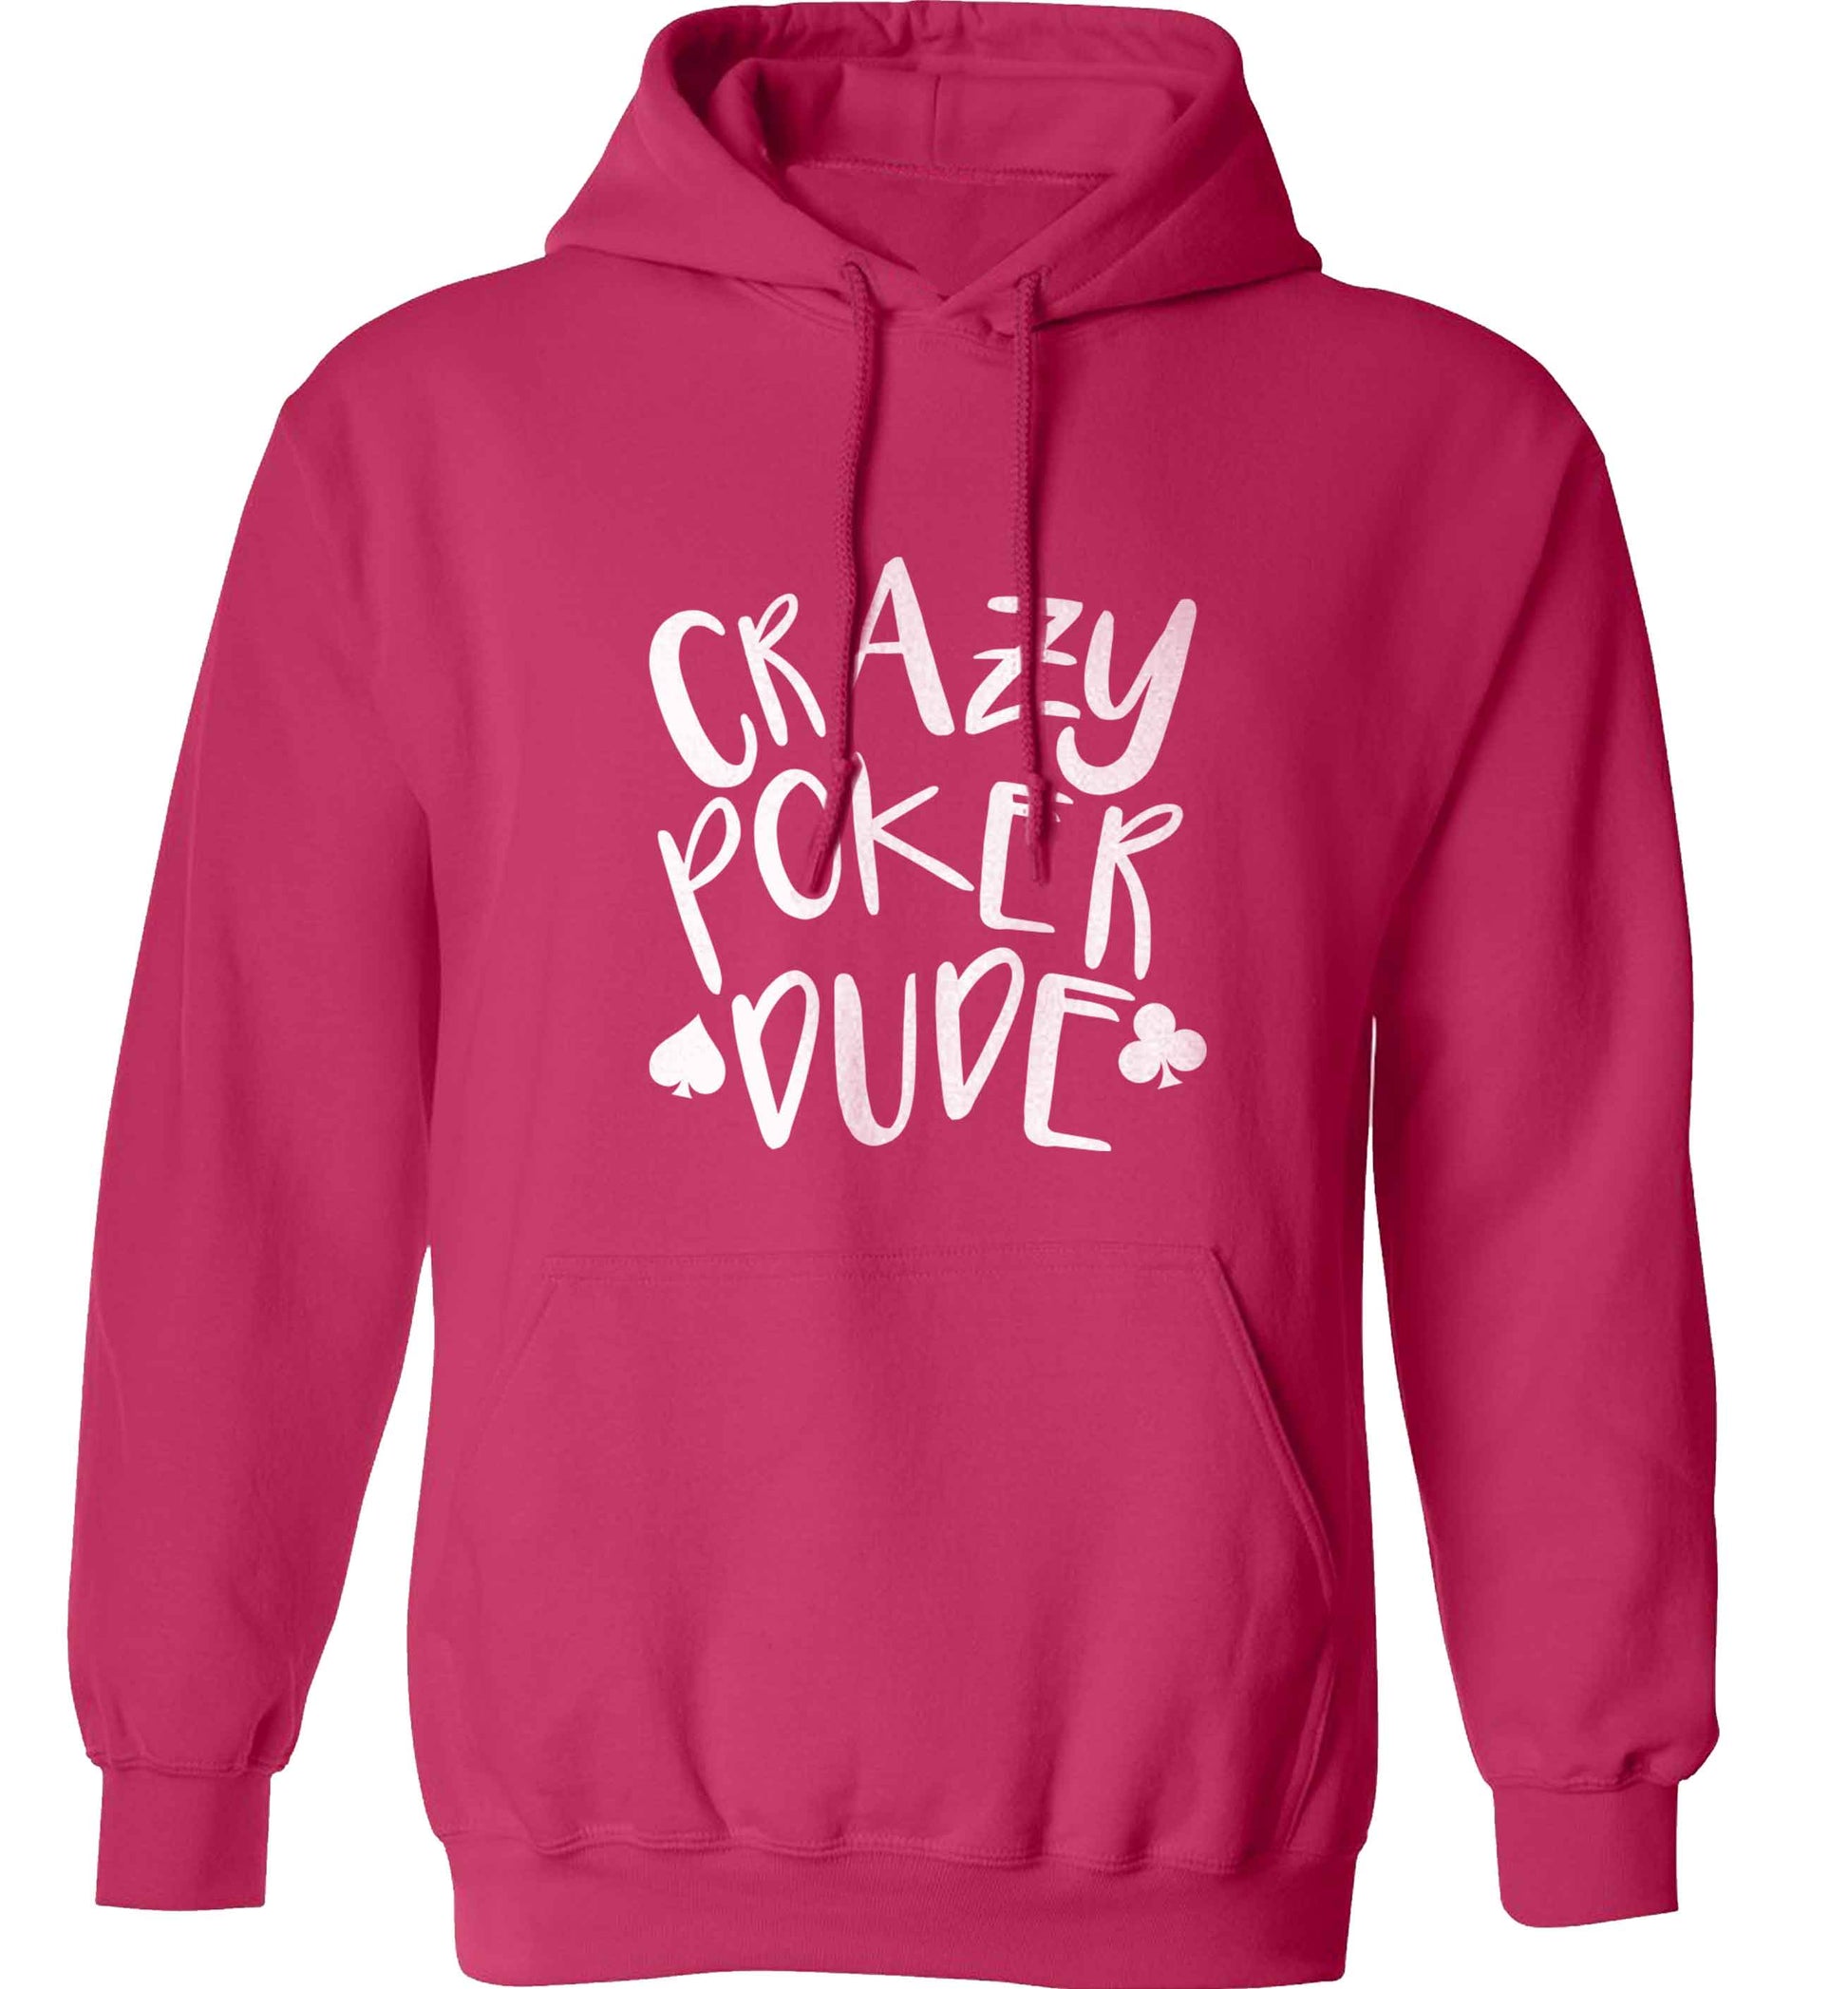 Crazy poker dude adults unisex pink hoodie 2XL